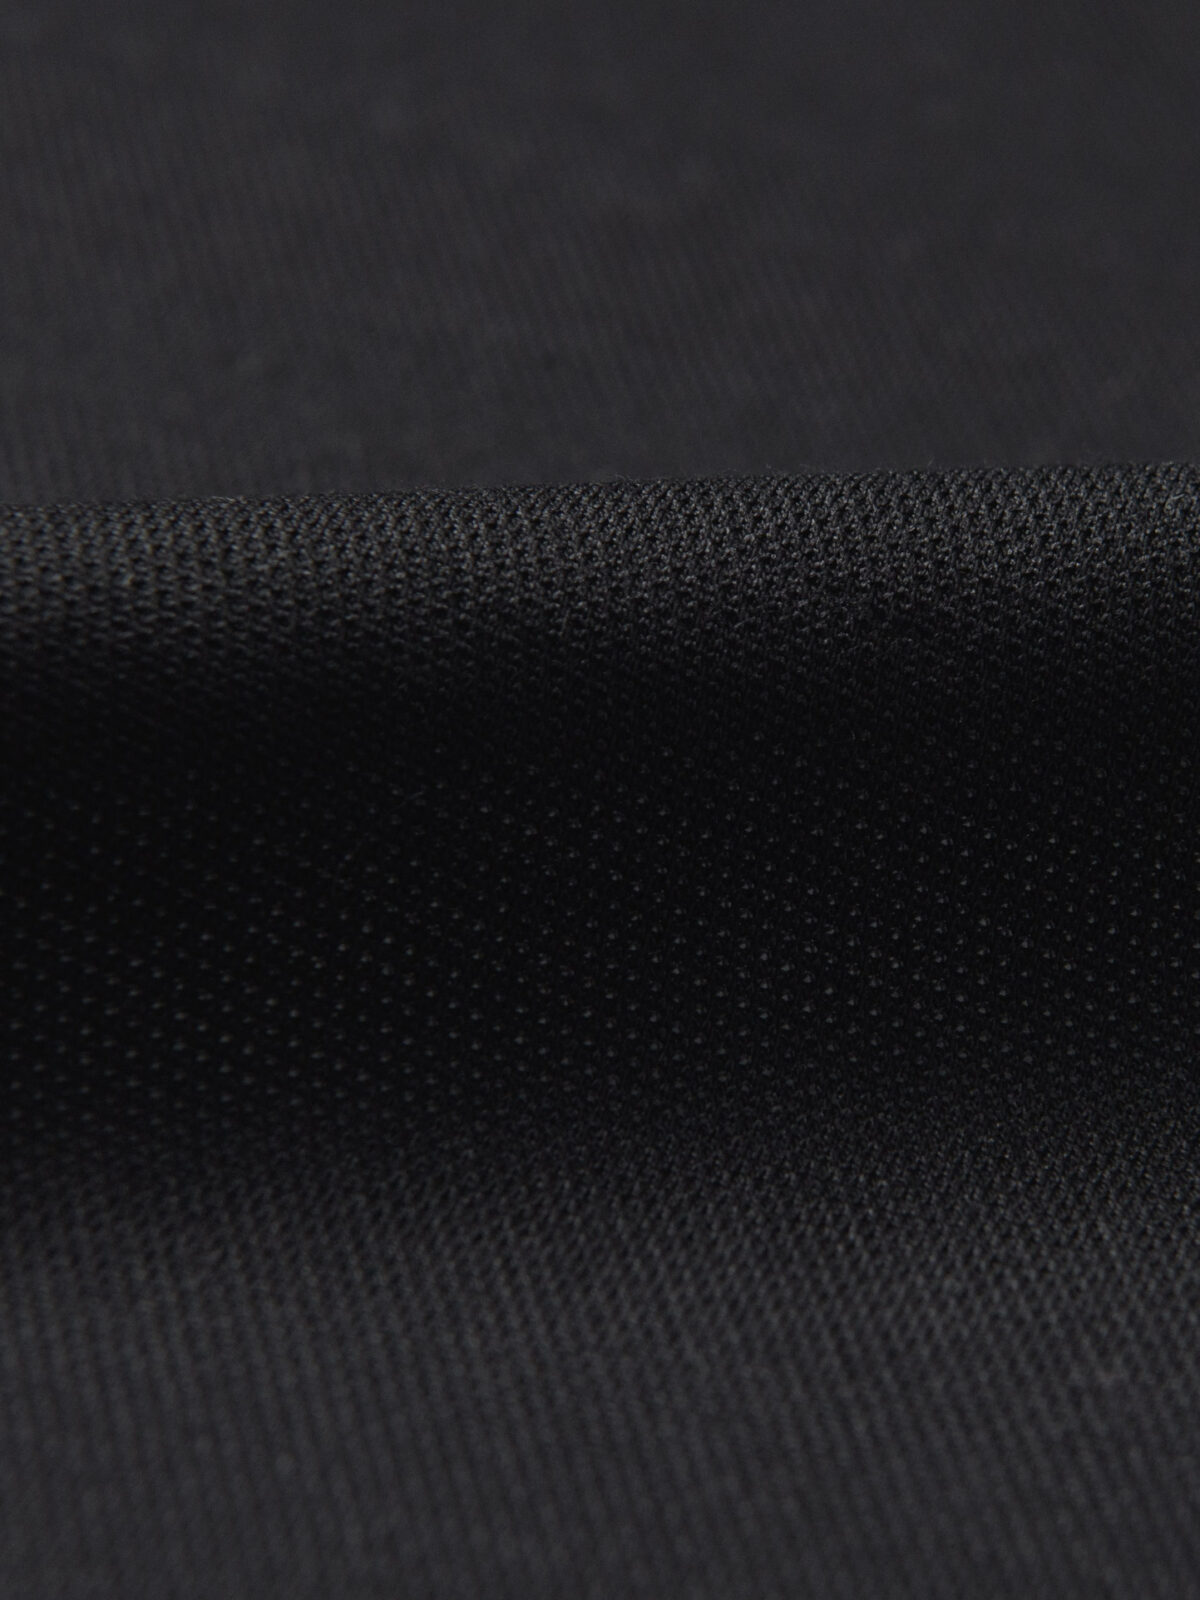 White Polyester Performance Jersey Knit Fabric